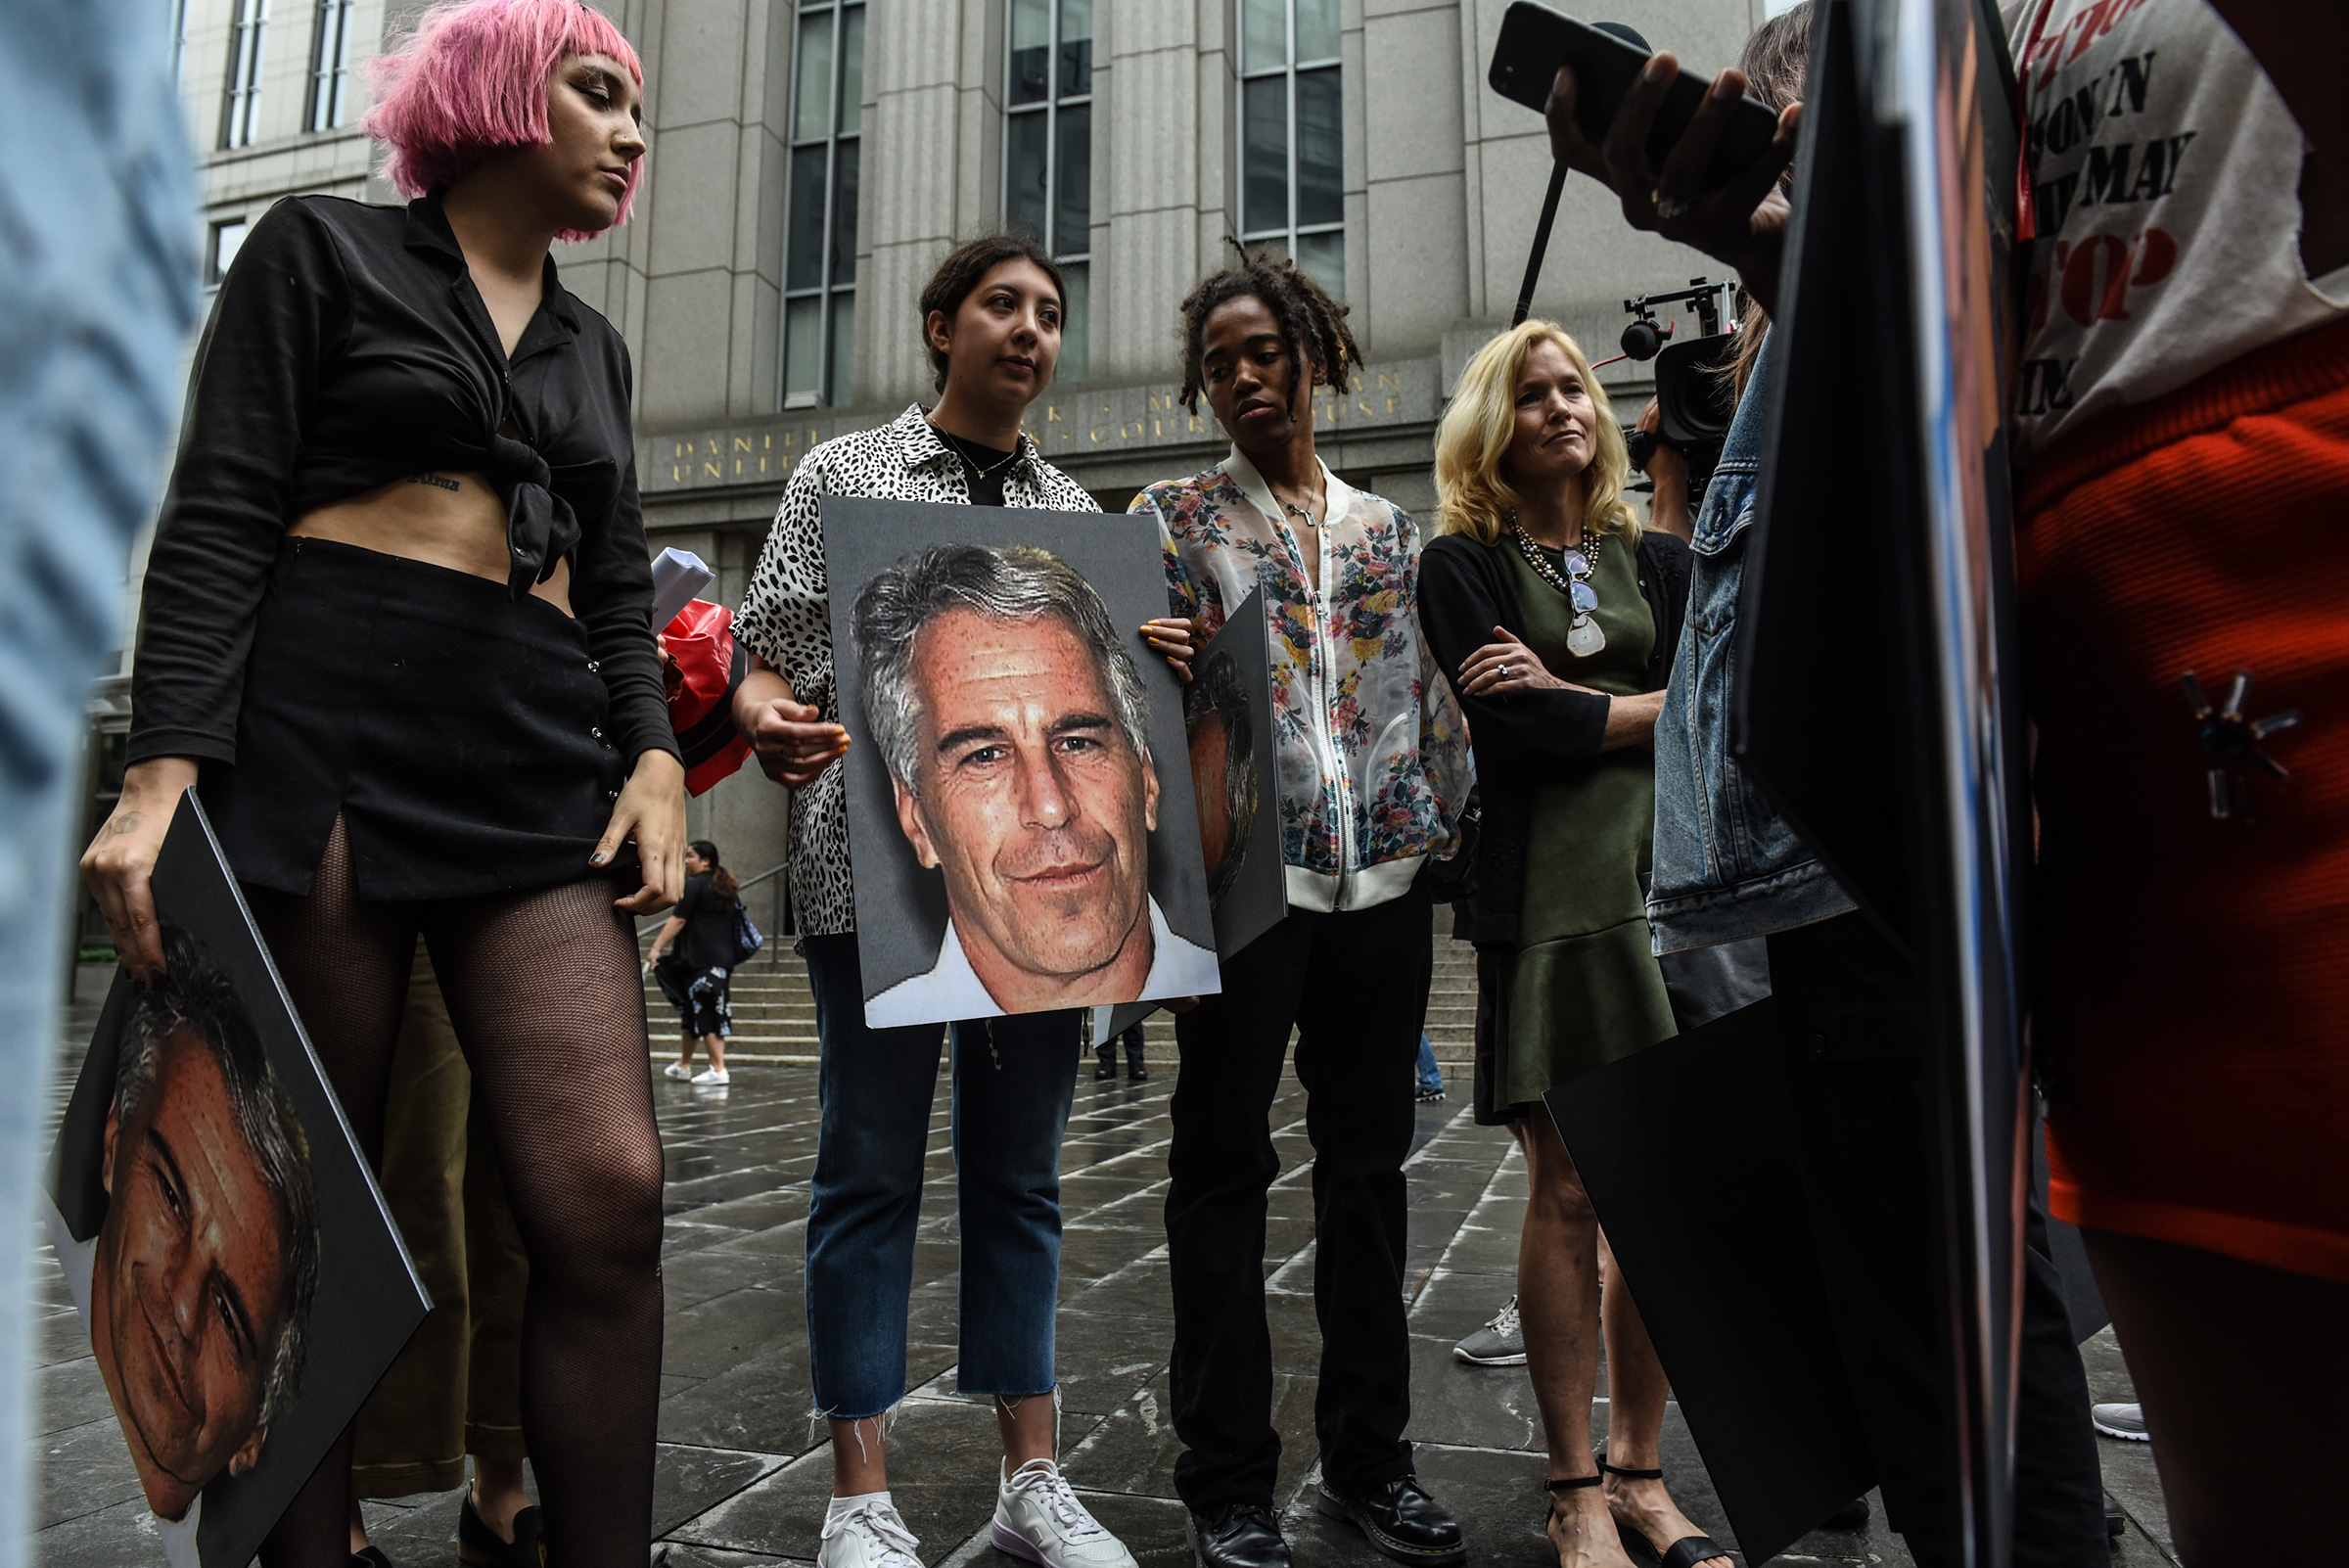 A protest group holds up signs of Jeffrey Epstein in front of the federal courthouse in New York City, July 8, 2019 (Stephanie Keith—Getty Images)